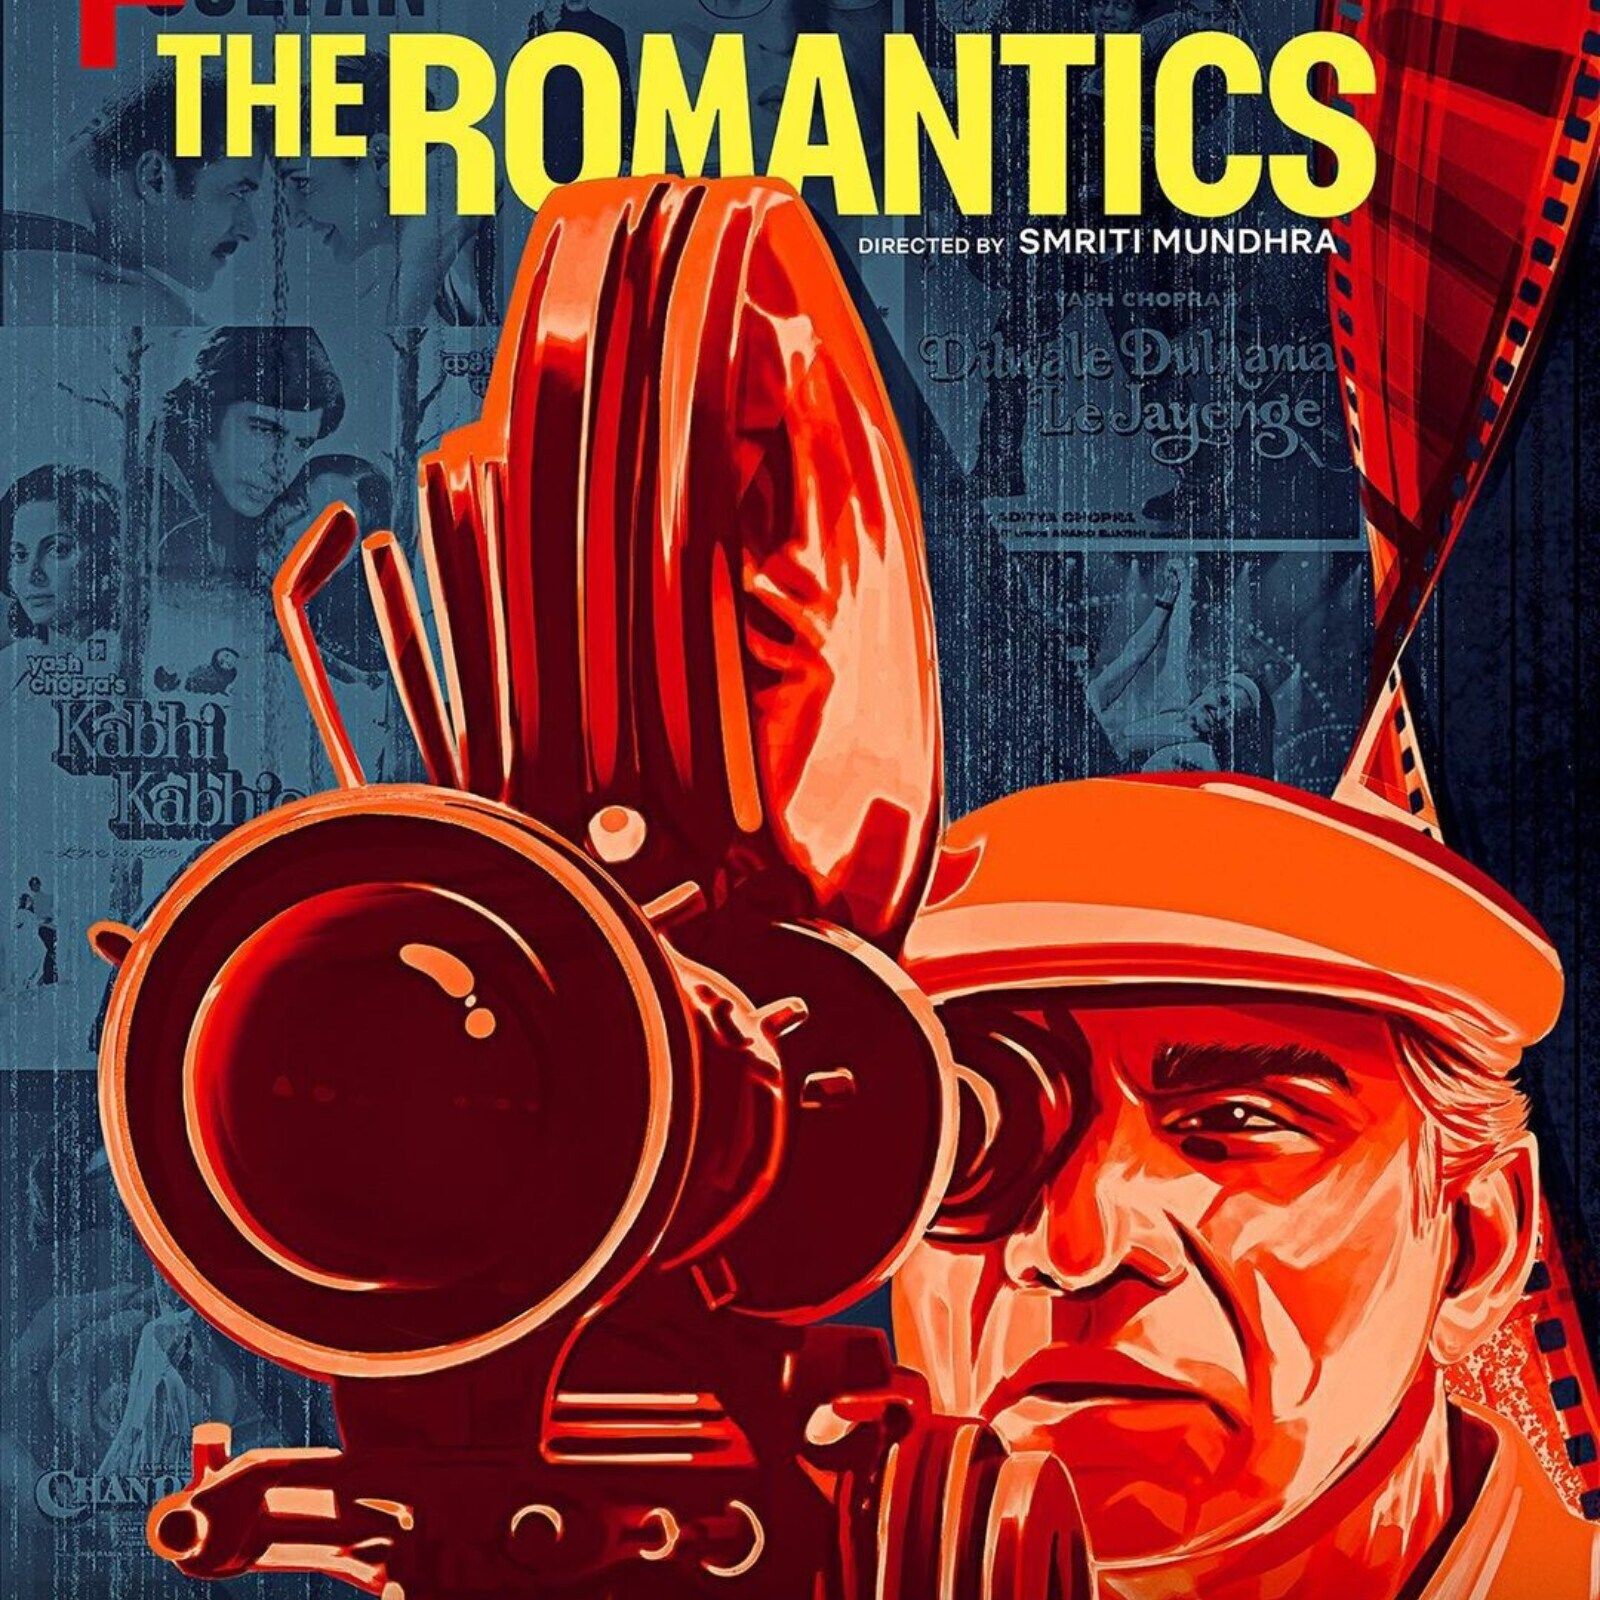 Netflix and Dil: High and Low - Cinema Marte Dum Tak and The Romantics